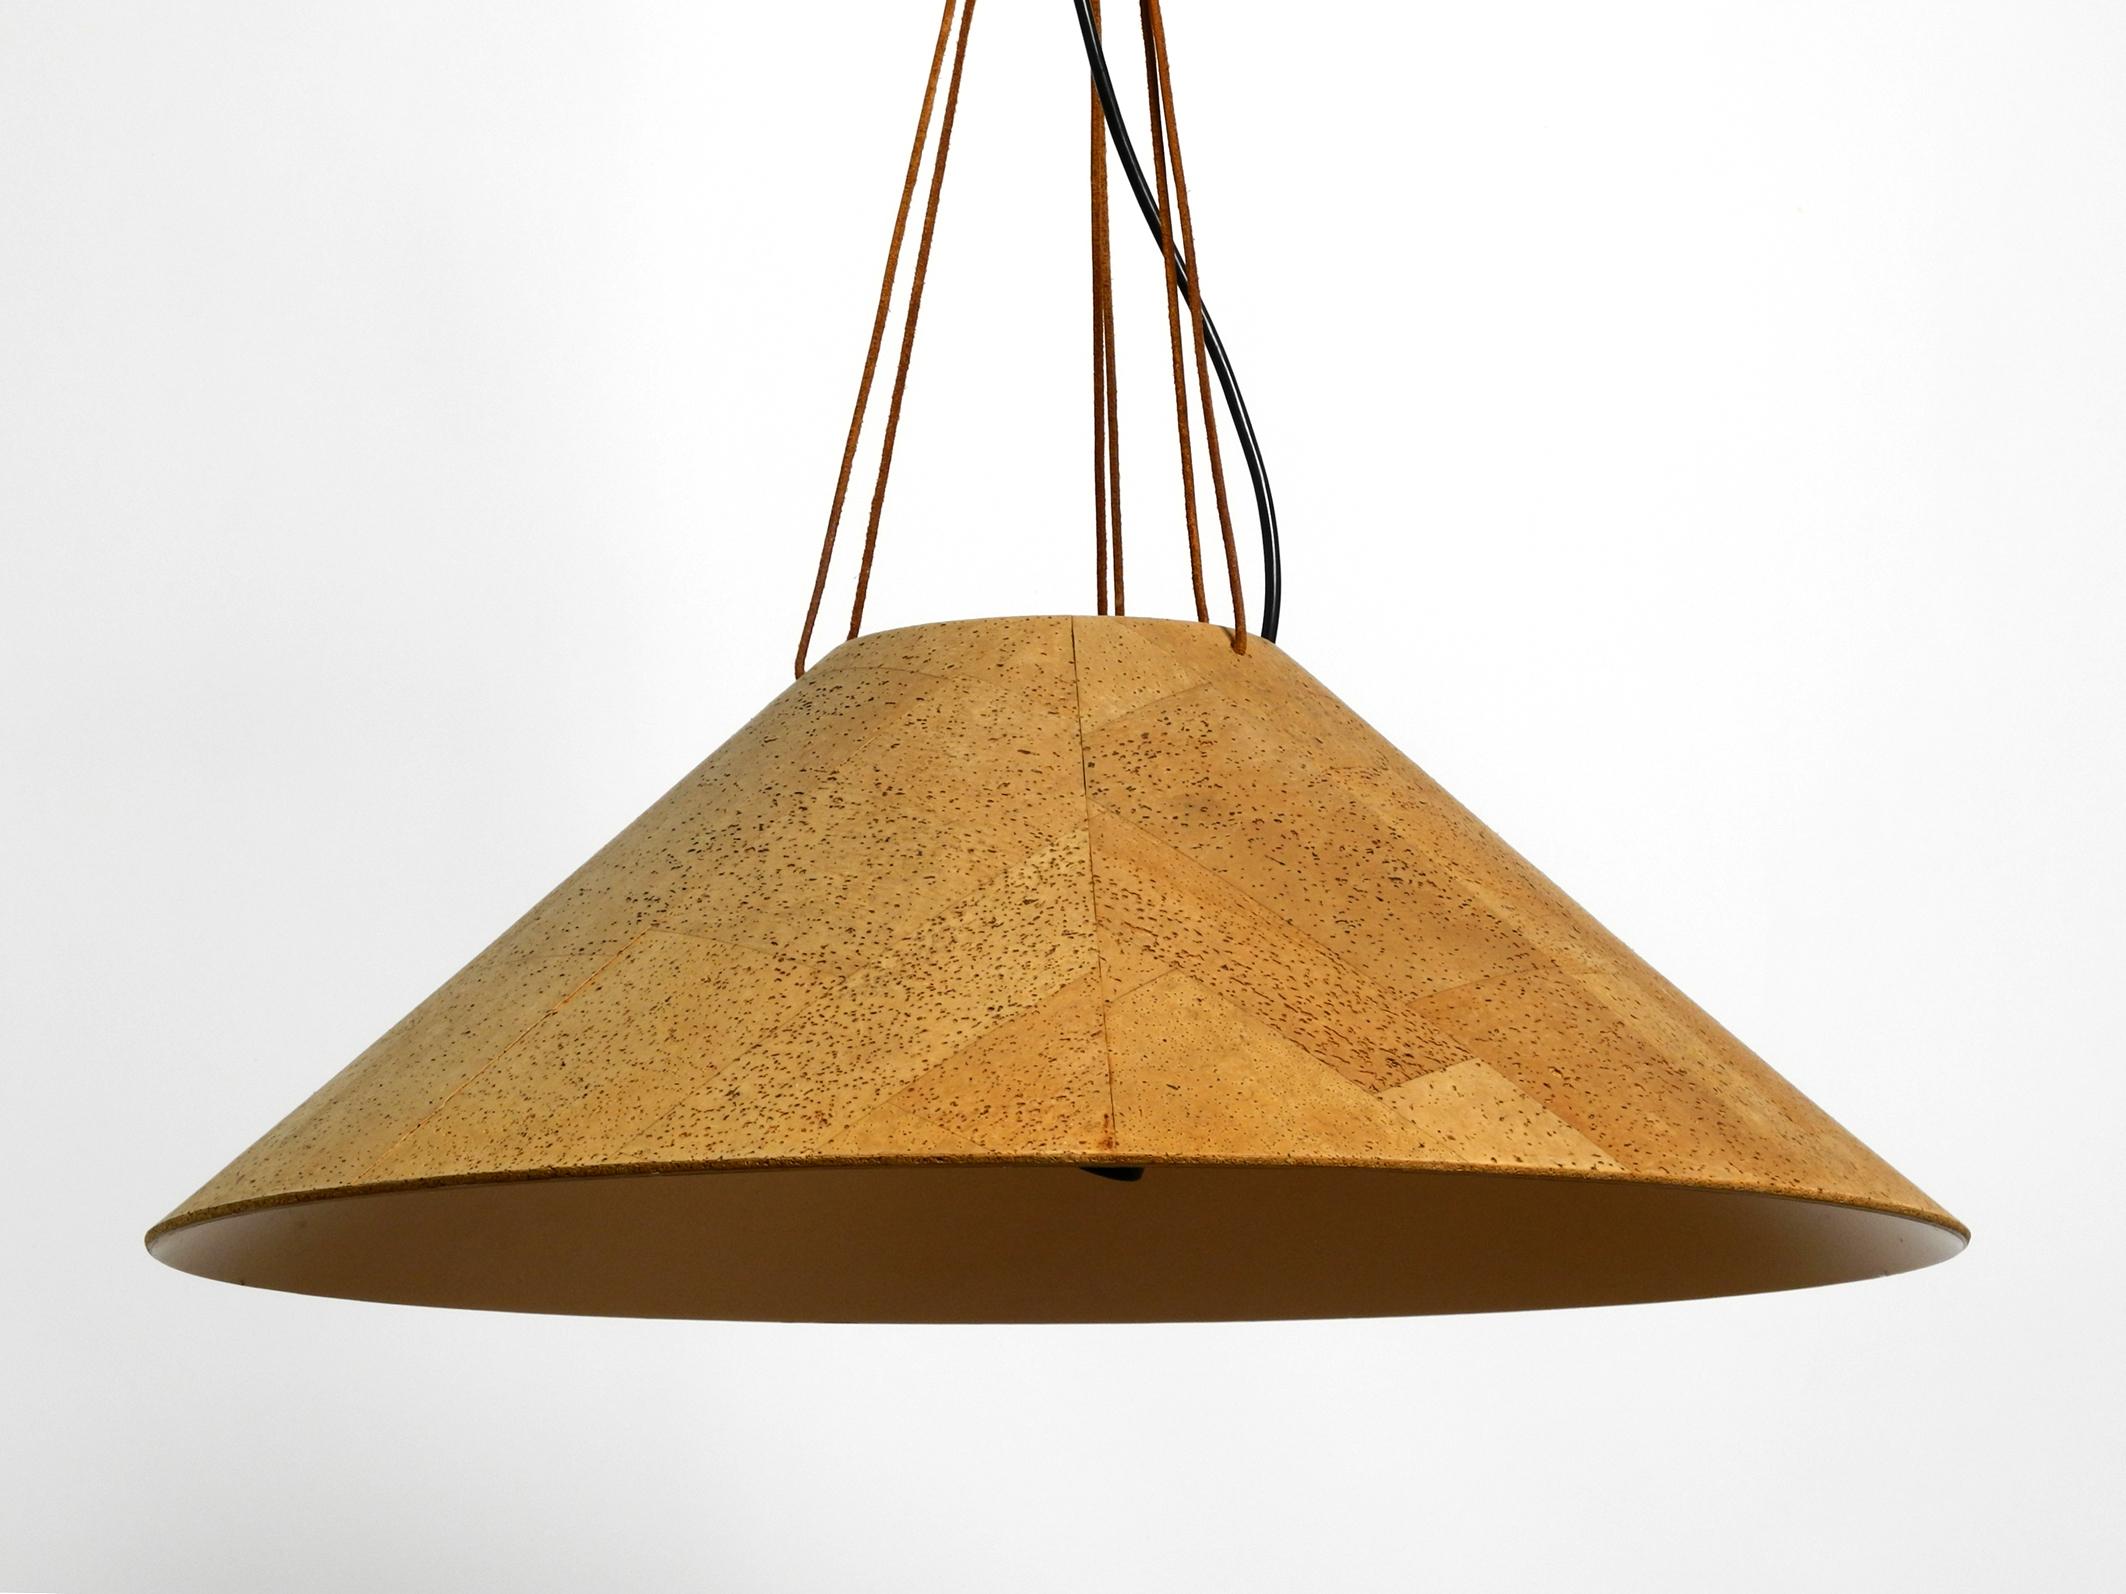 Very rare large 1970s original cork hanging lamp from M-Design.
Designed by Wilhelm Zanoth and Ingo Maurer. Made in Germany.
Beautiful classic design. In very good original condition.
The round shade is made of aluminum on the outside with a cork